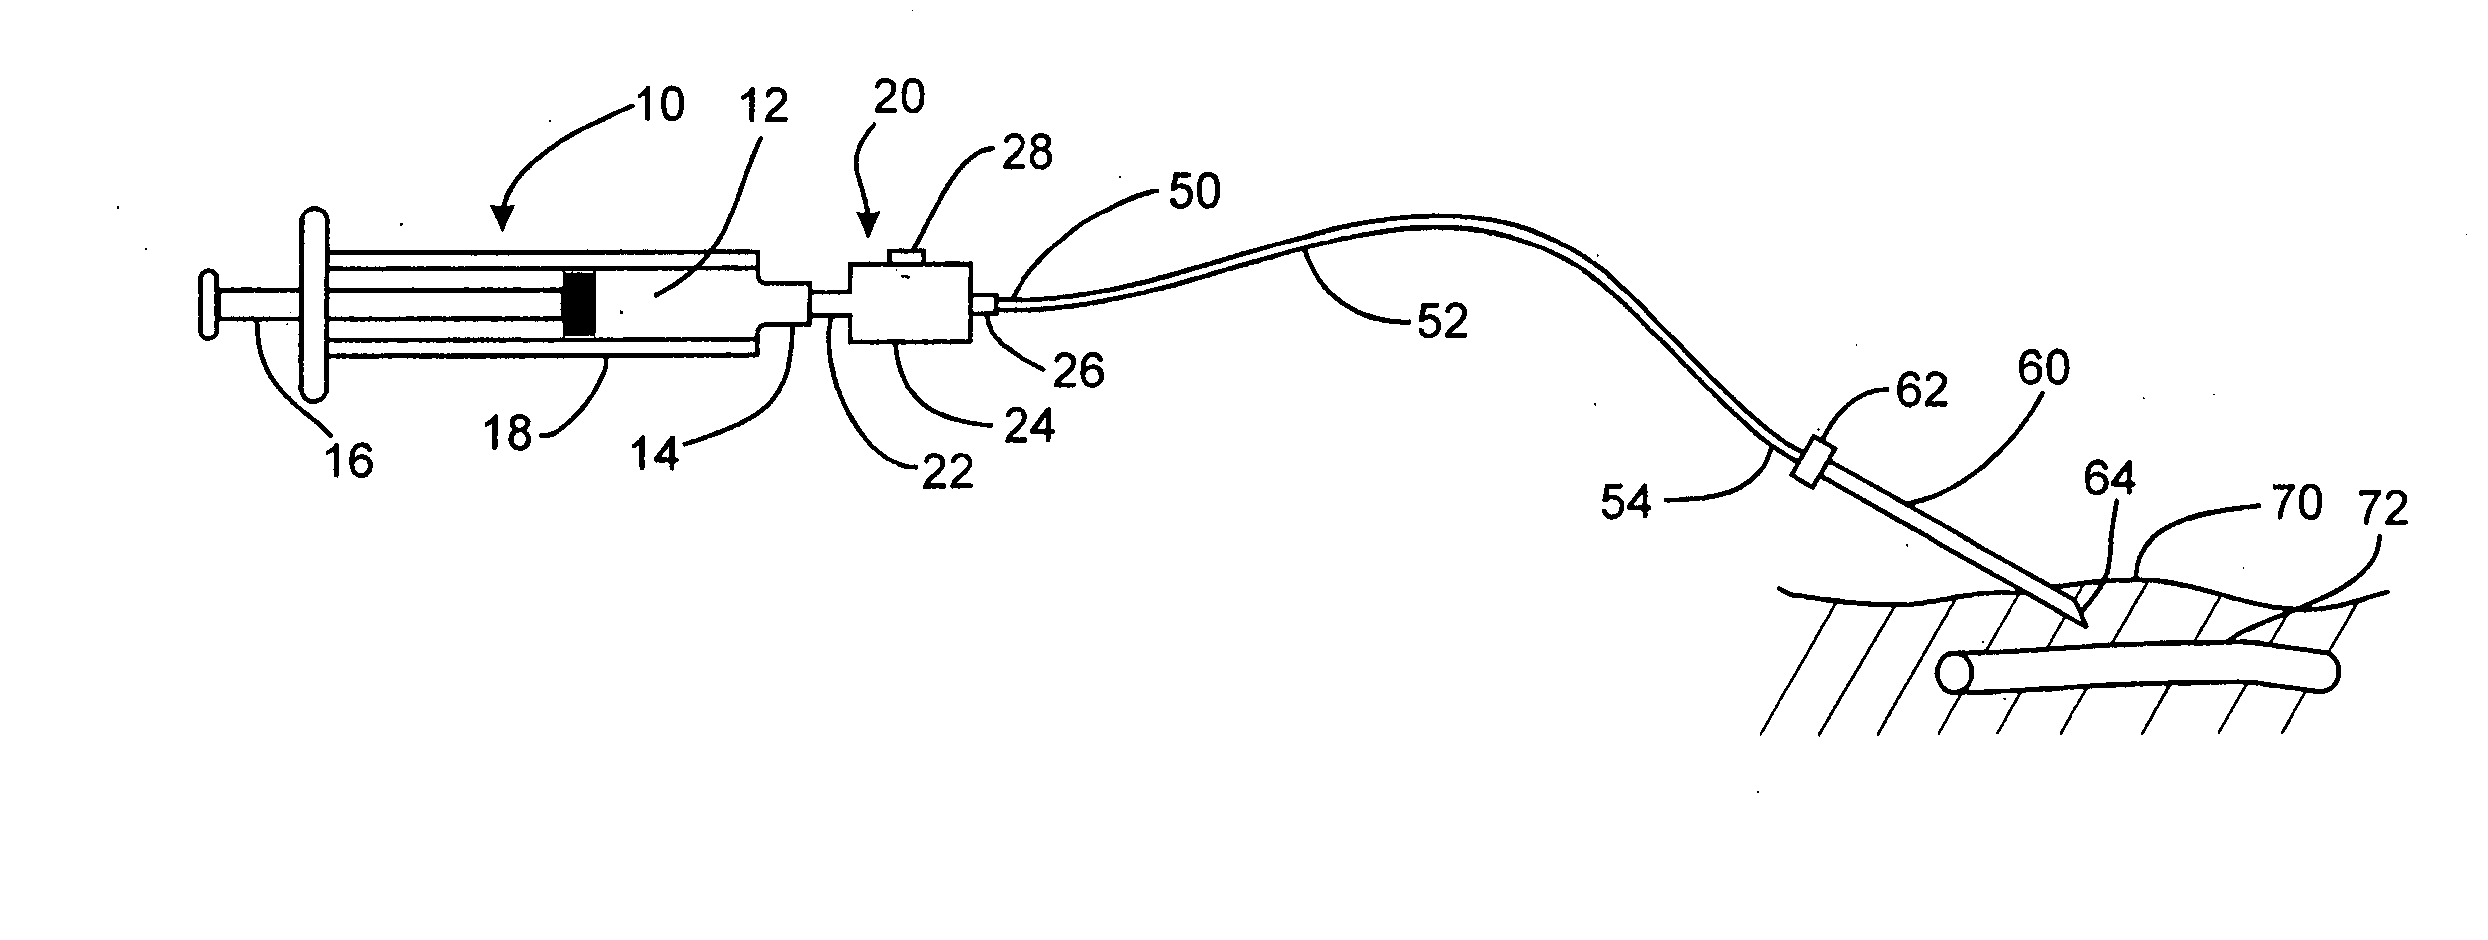 Method and apparatus to decrease the risk of intraneuronal injection during administration of nerve block anesthesia